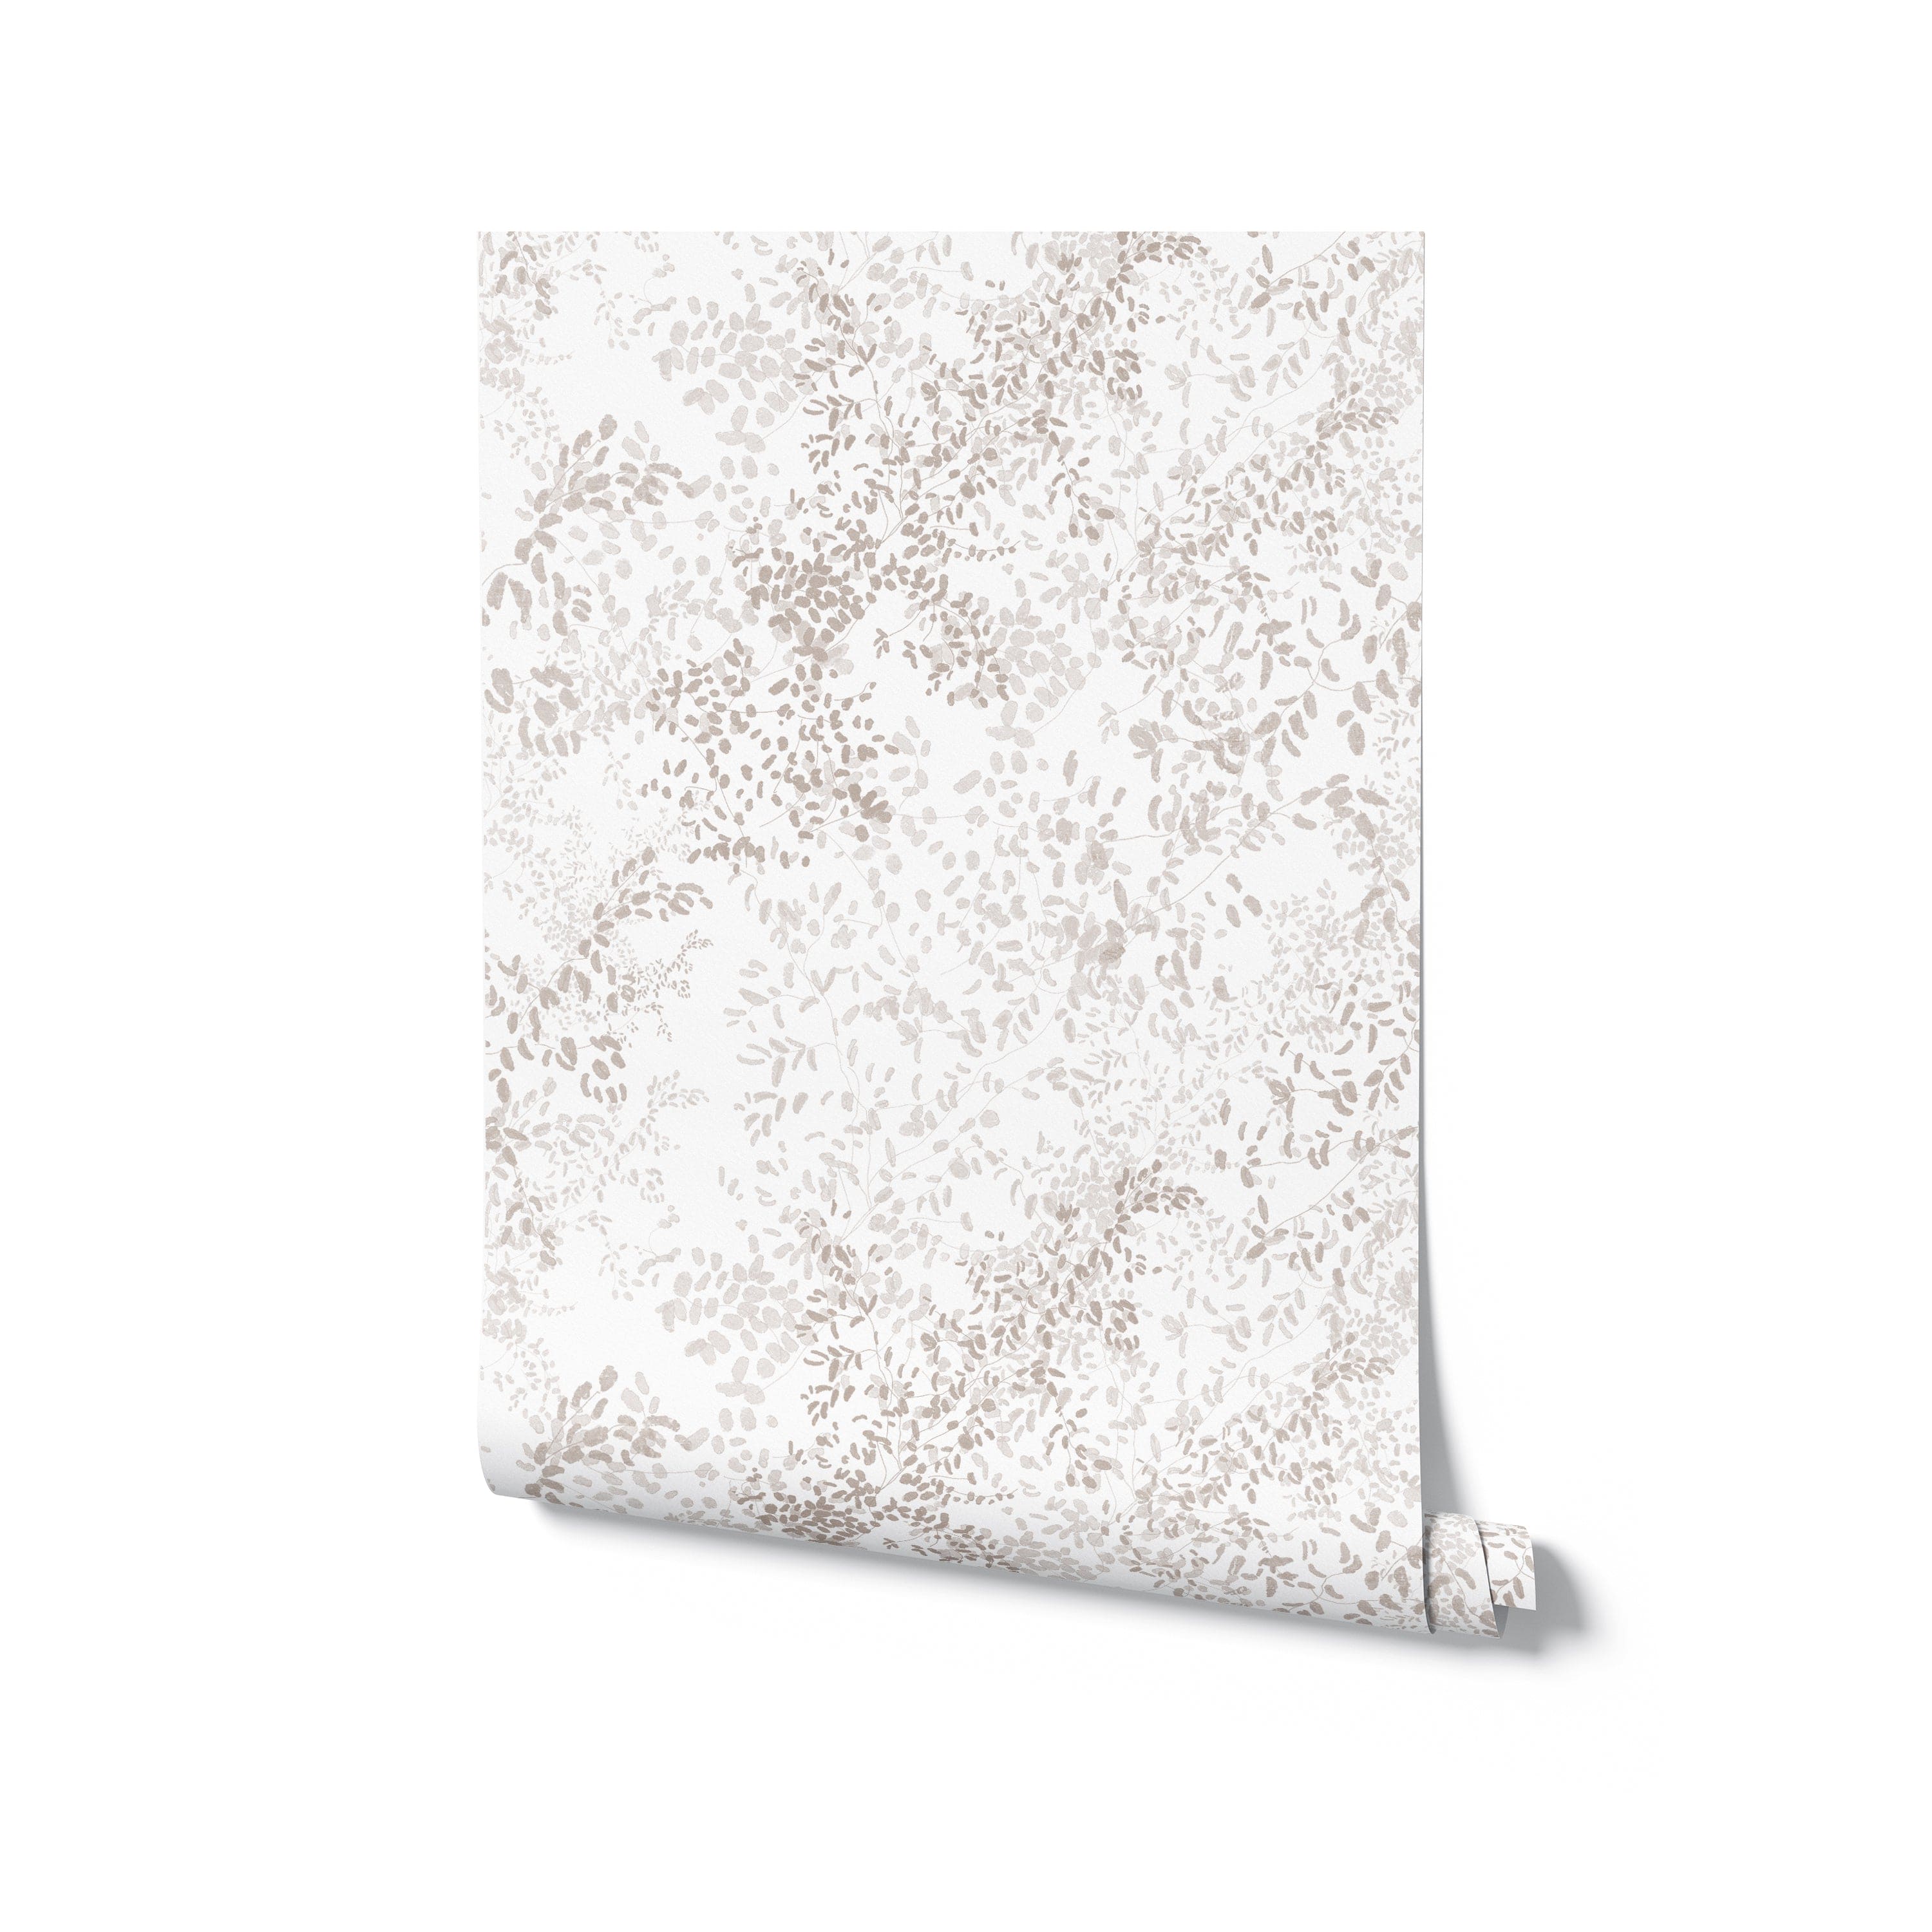 A roll of Golden Delicate Winter Floral wallpaper, partially unrolled to reveal a lush pattern of delicate beige floral motifs spread across a white background, suitable for adding a touch of elegance to any room.